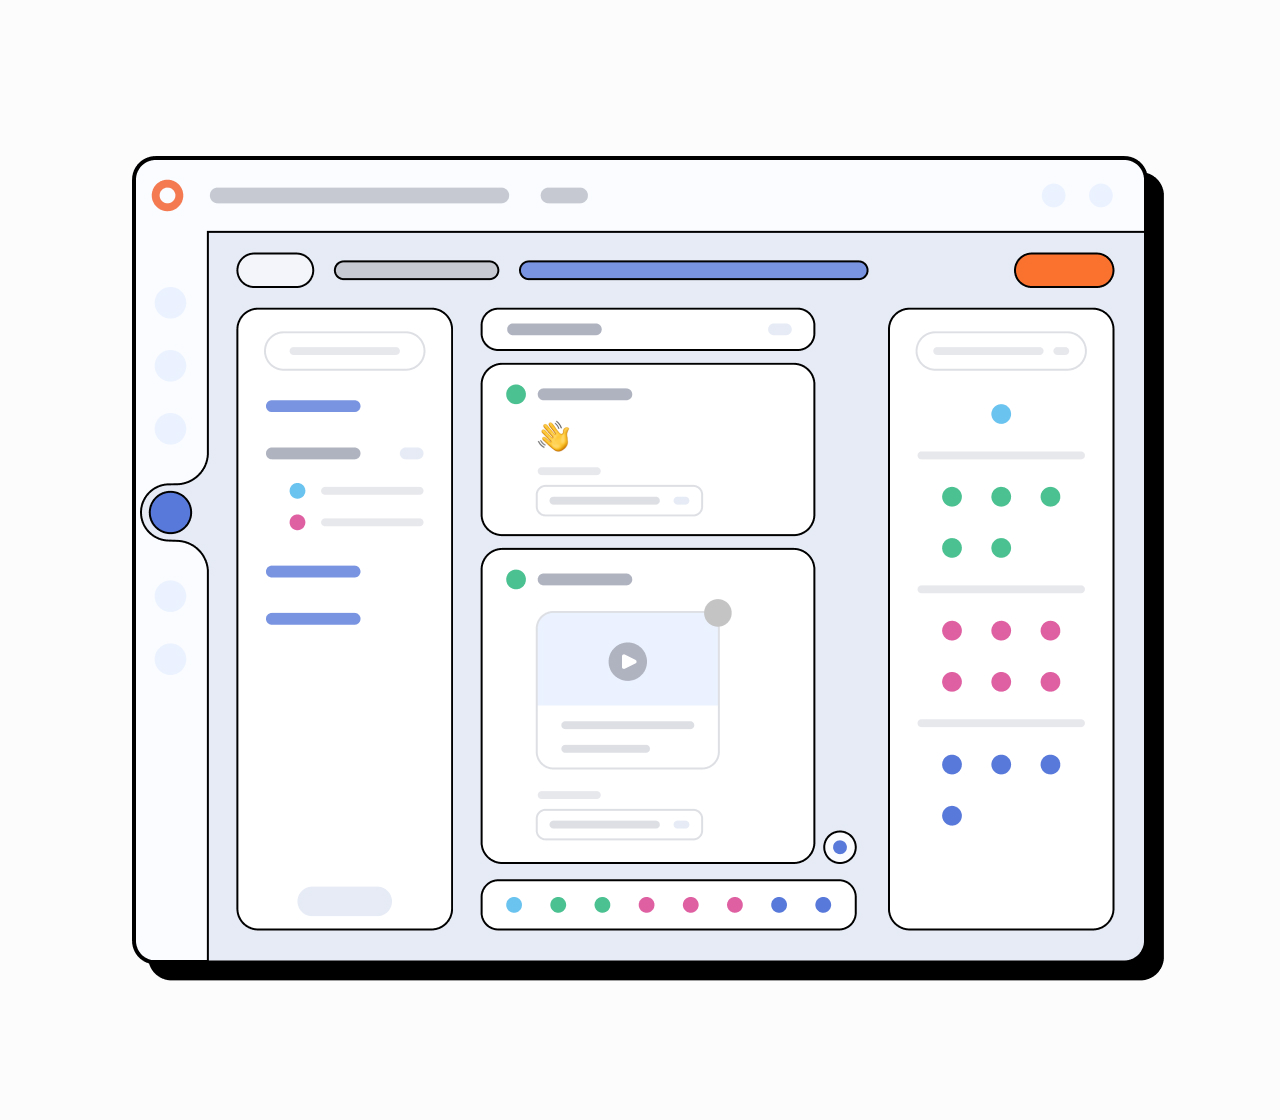 Conversation Builder dashboard illustration of where you can build WhatsApp chatbots